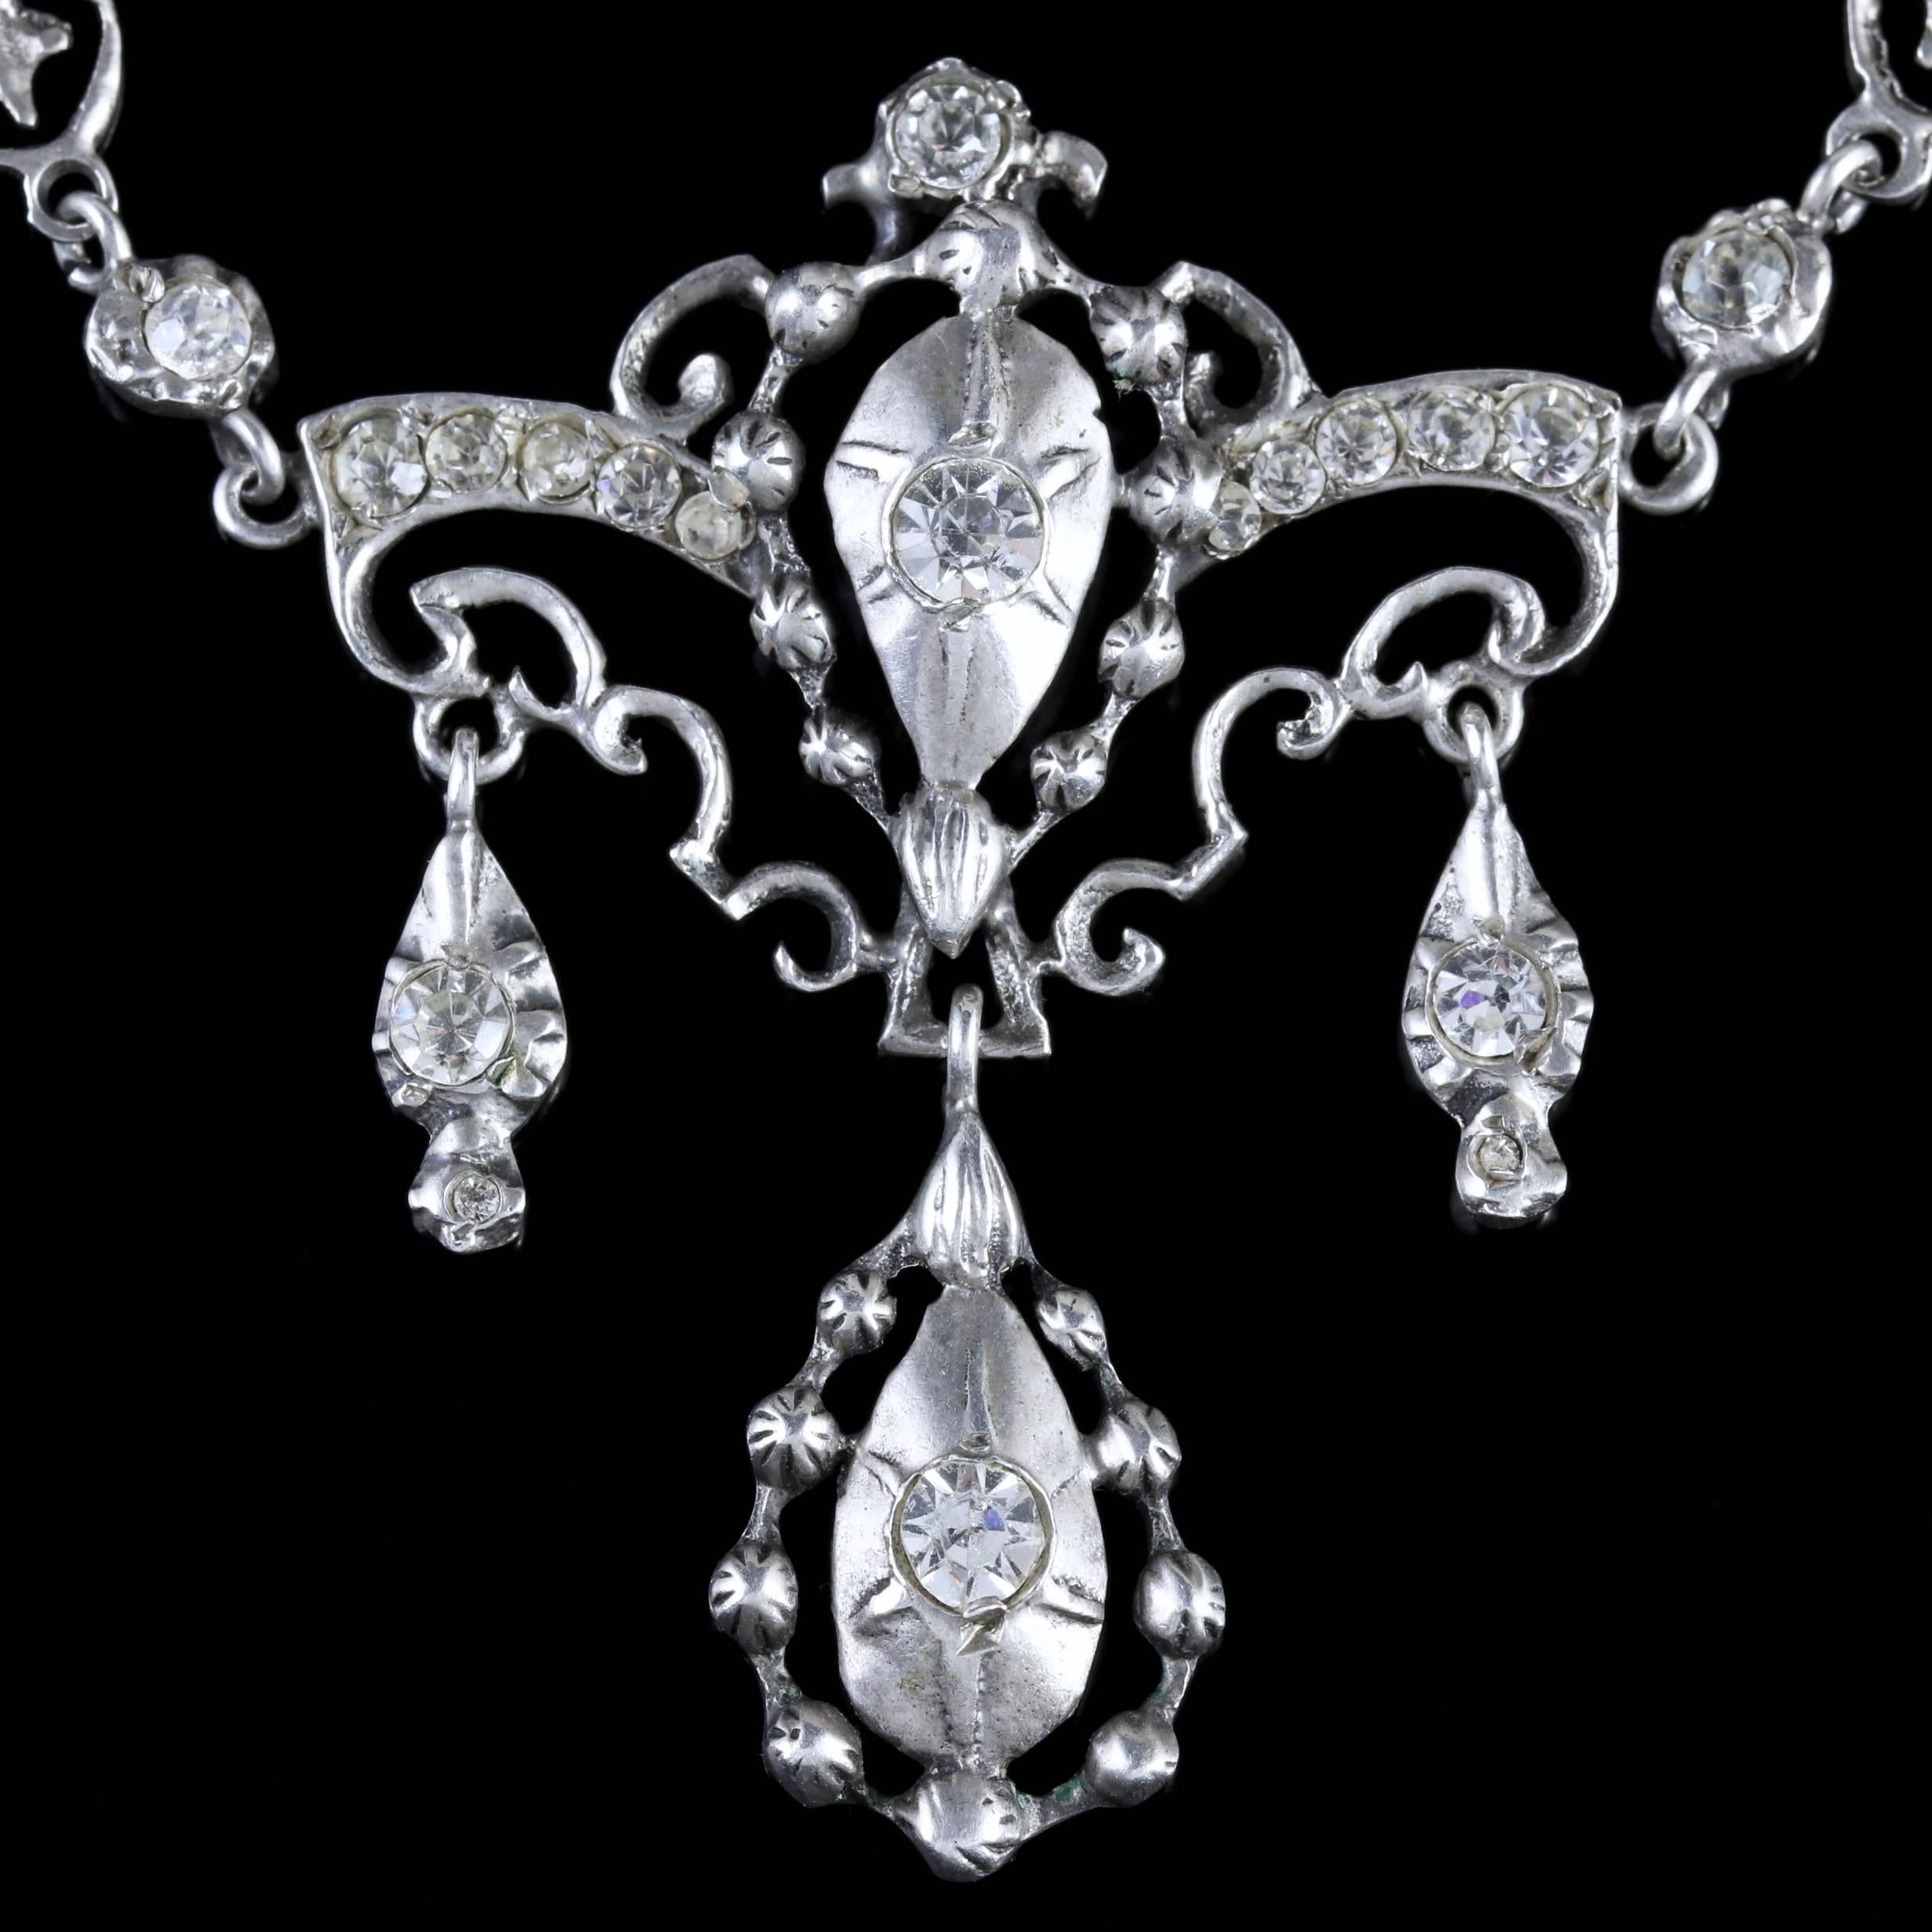 To read more please click continue reading below-

This fabulous antique Sterling Silver Paste Necklace is genuine Victorian Circa 1900. 

The beautiful necklace is adorned with sparkling White Paste stones leading to a fancy Paste pendant with 3